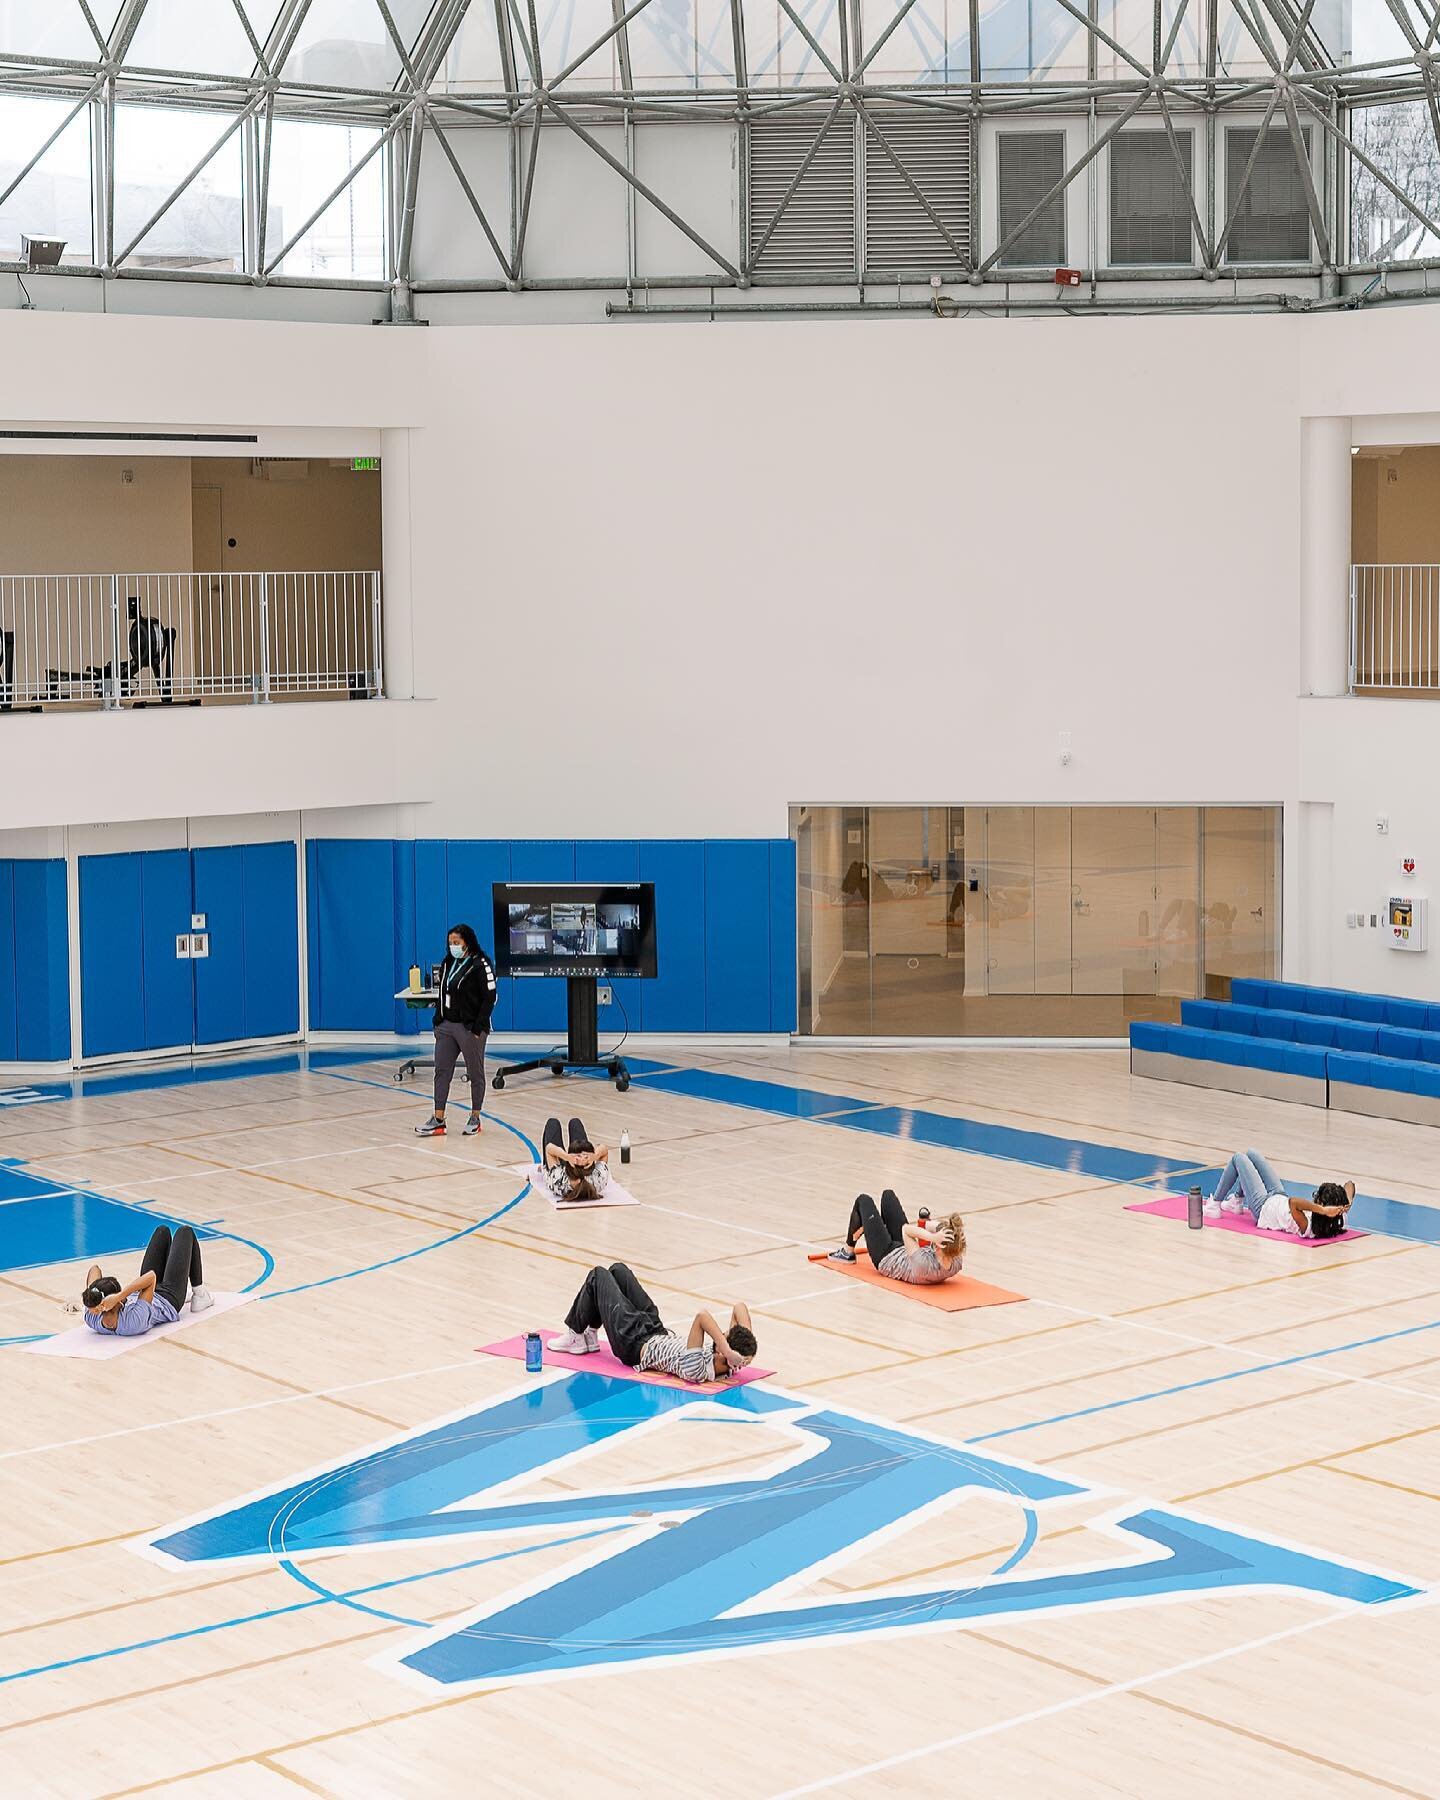 We can&rsquo;t wait to host local teams in our brand new gym! In the meantime, Coach Chafin is using the space to encourage our students to develop healthy, lifelong habits. #PhysicalLiteracy
 
Curious about our new facilities? Email mydcadmission@wh